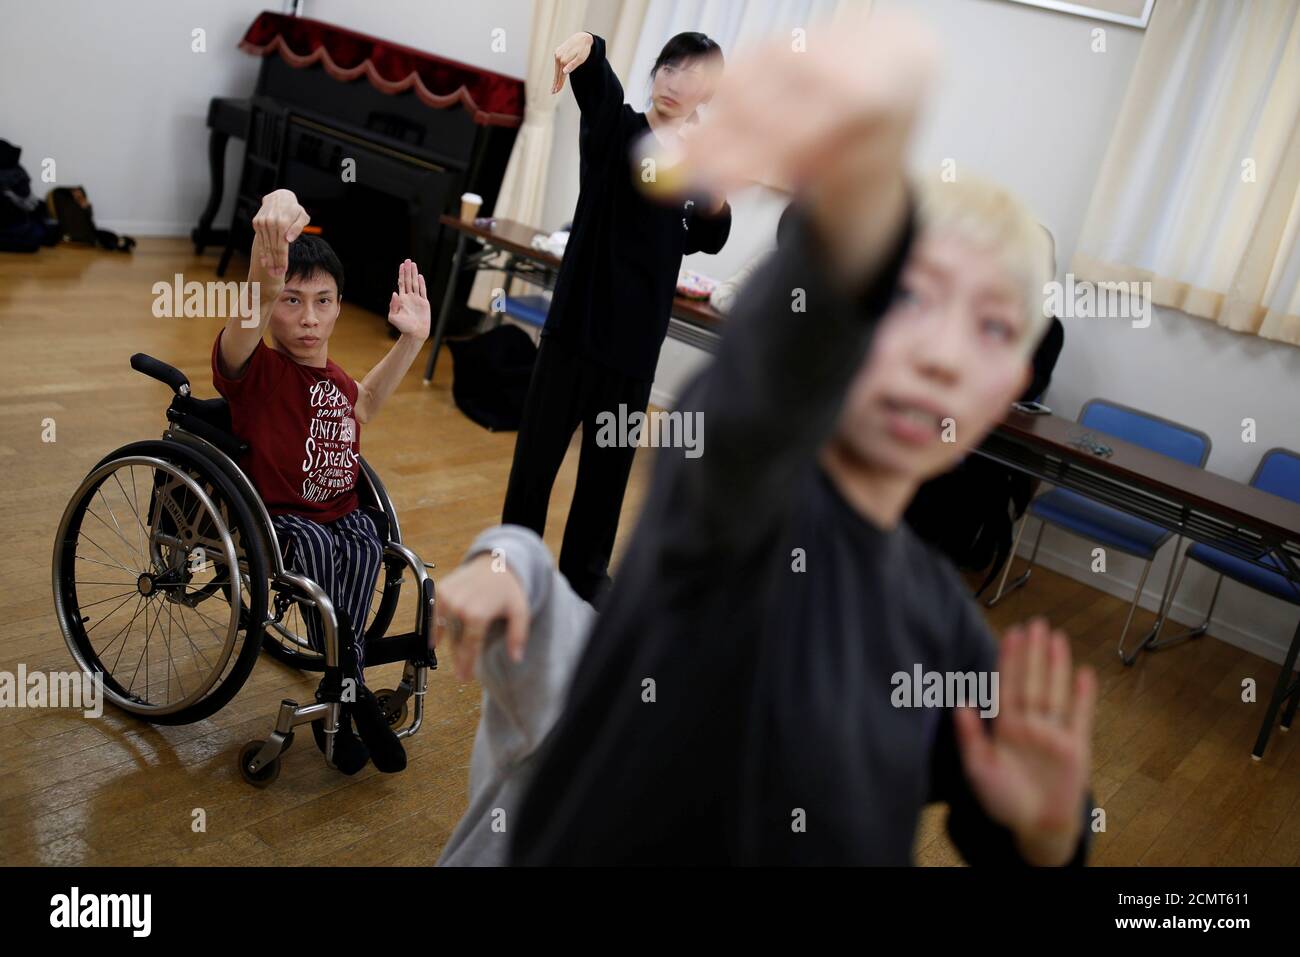 Kenta Kambara, 34, rehearses for an upcoming performance at a studio in Tokyo, Japan, February 1, 2020. Kambara who was born with spina bifida, a disorder that paralysed his lower body, aims to perform at the Tokyo 2020 Paralympics opening or closing ceremonies. 'If you can't walk with your legs, it's okay to walk with your hands. If there is something you want to do but cannot, it's okay to find another way,' he said. REUTERS/Kim Kyung-Hoon TPX IMAGES OF THE DAY.     SEARCH 'WHEELCHAIR DANCER' FOR THIS STORY. SEARCH 'WIDER IMAGE' FOR ALL STORIES. Stock Photo